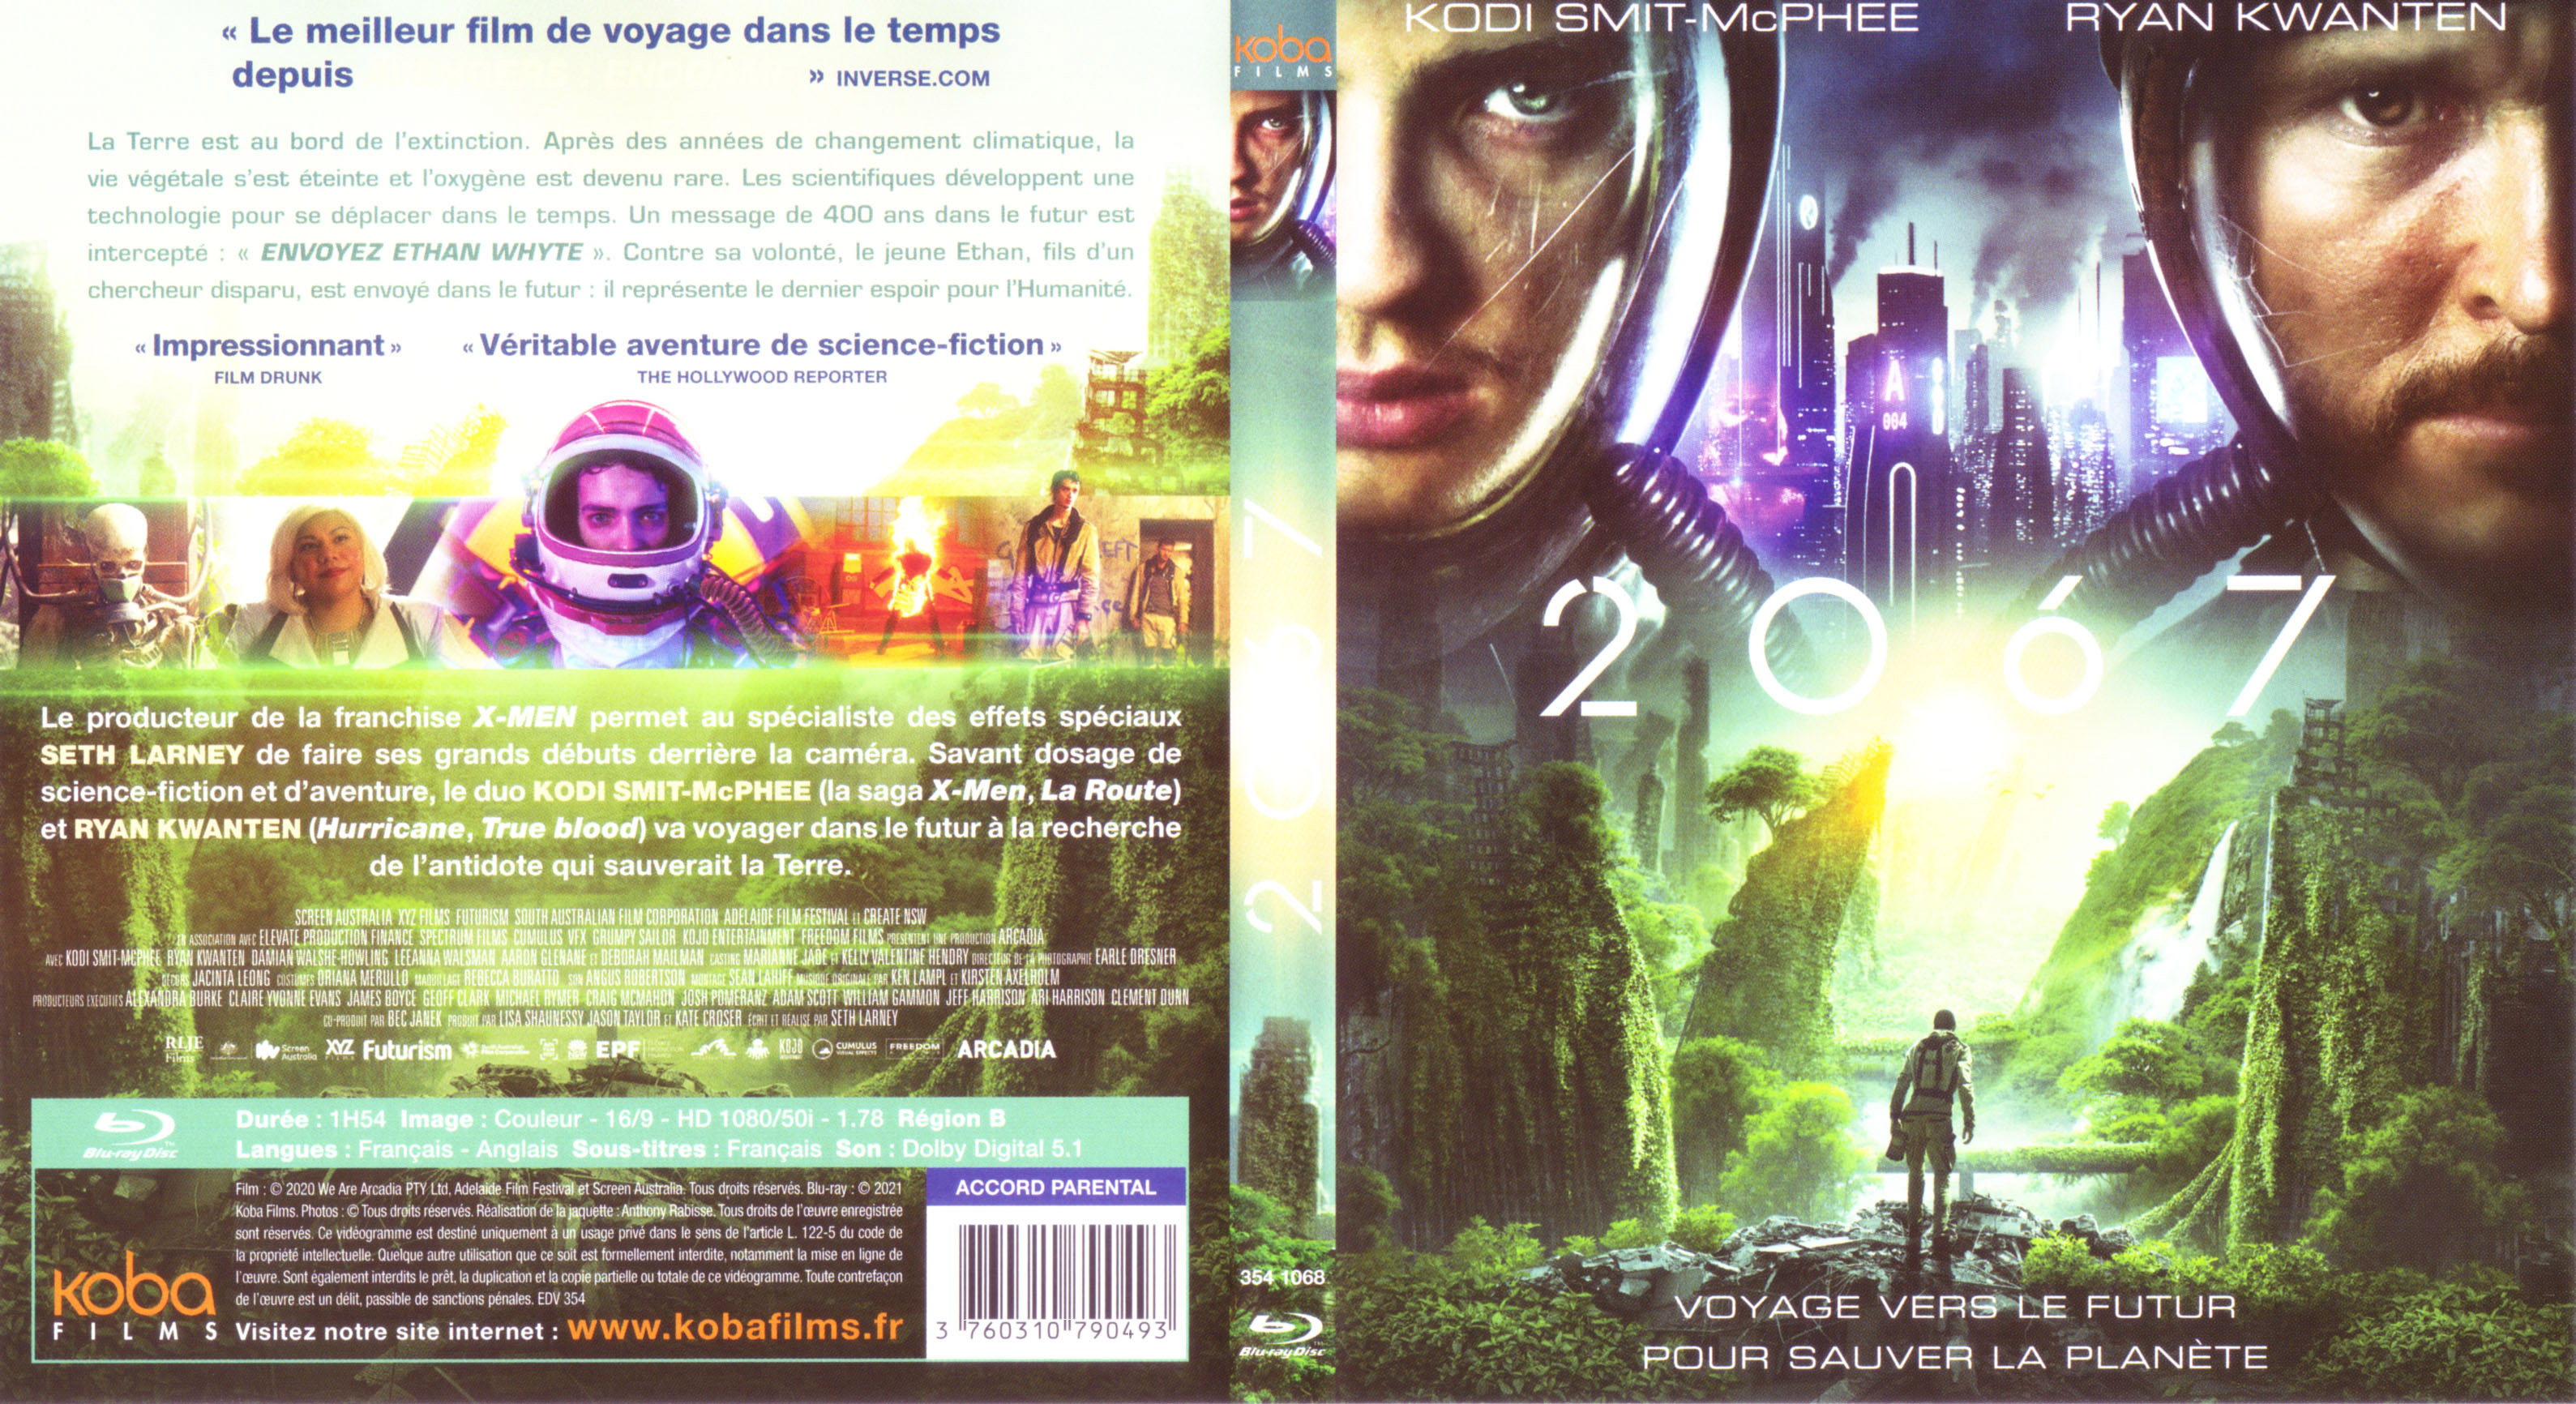 Jaquette DVD 2067 (BLU-RAY)